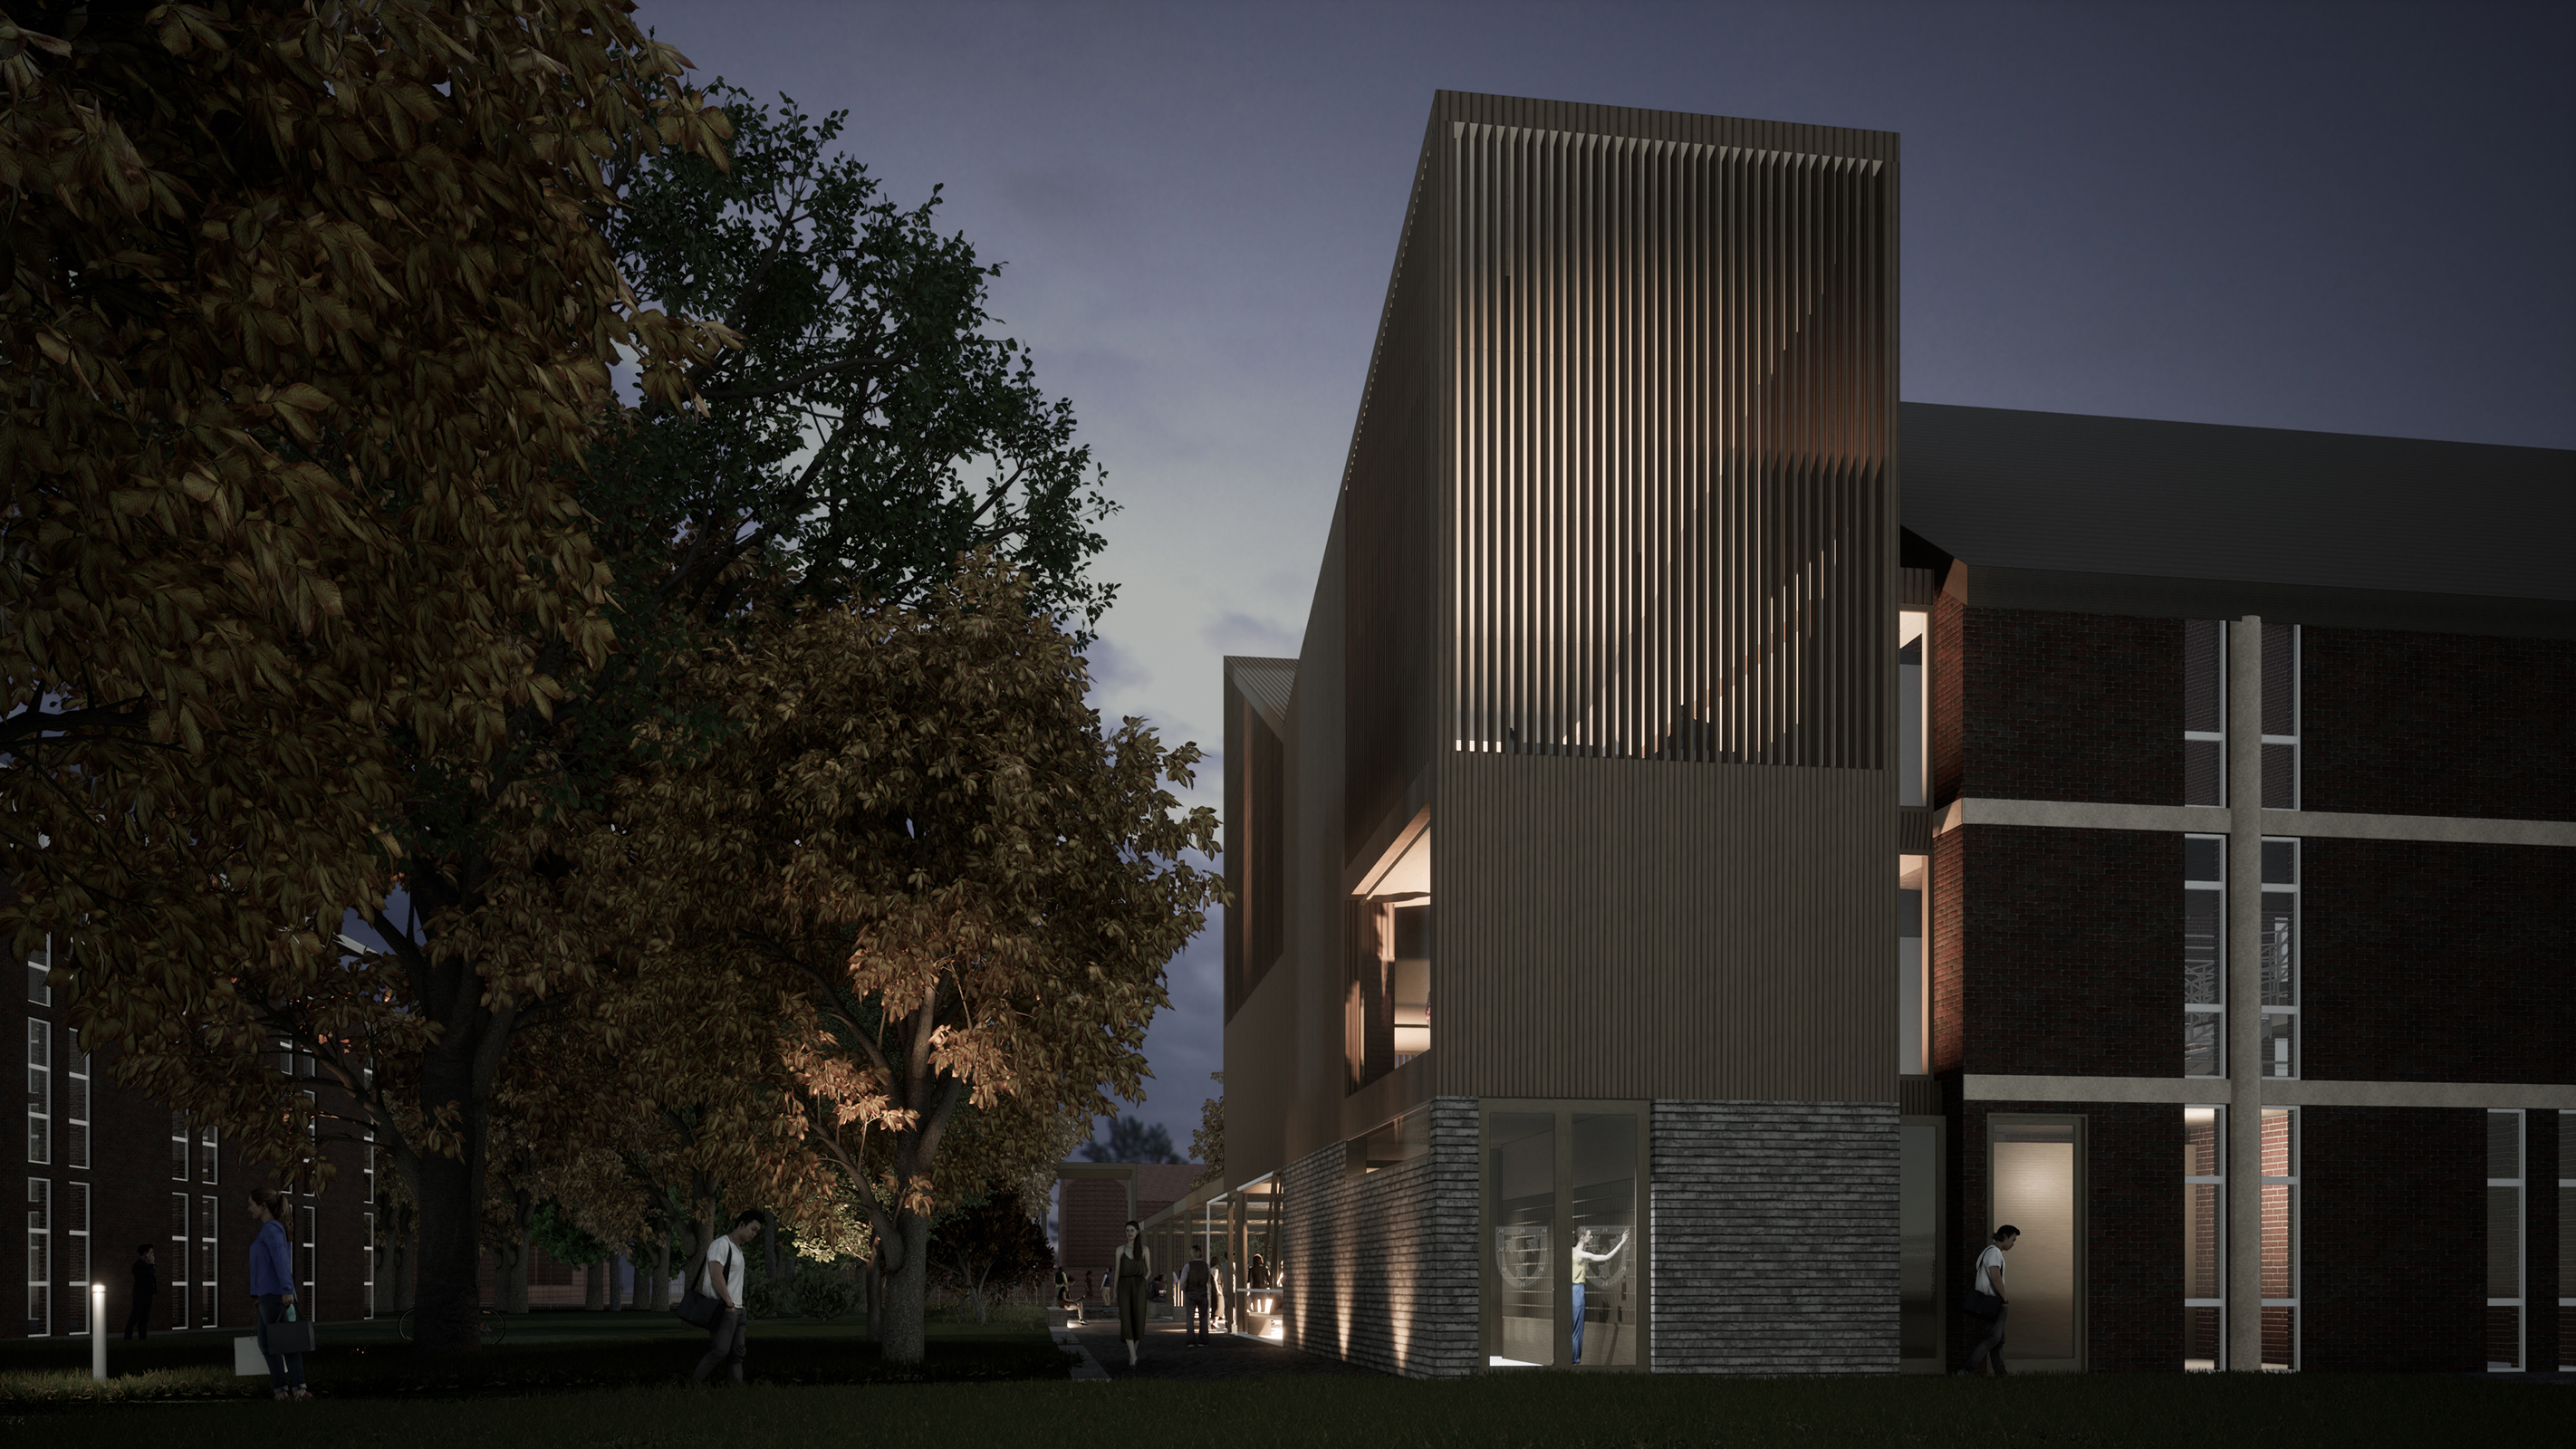 Night time visualisation showing uplit building next to trees. Ground floor is clad in light brick, with vertical timber to upper floors and tall winged roof  | cdc studio cambridge architects